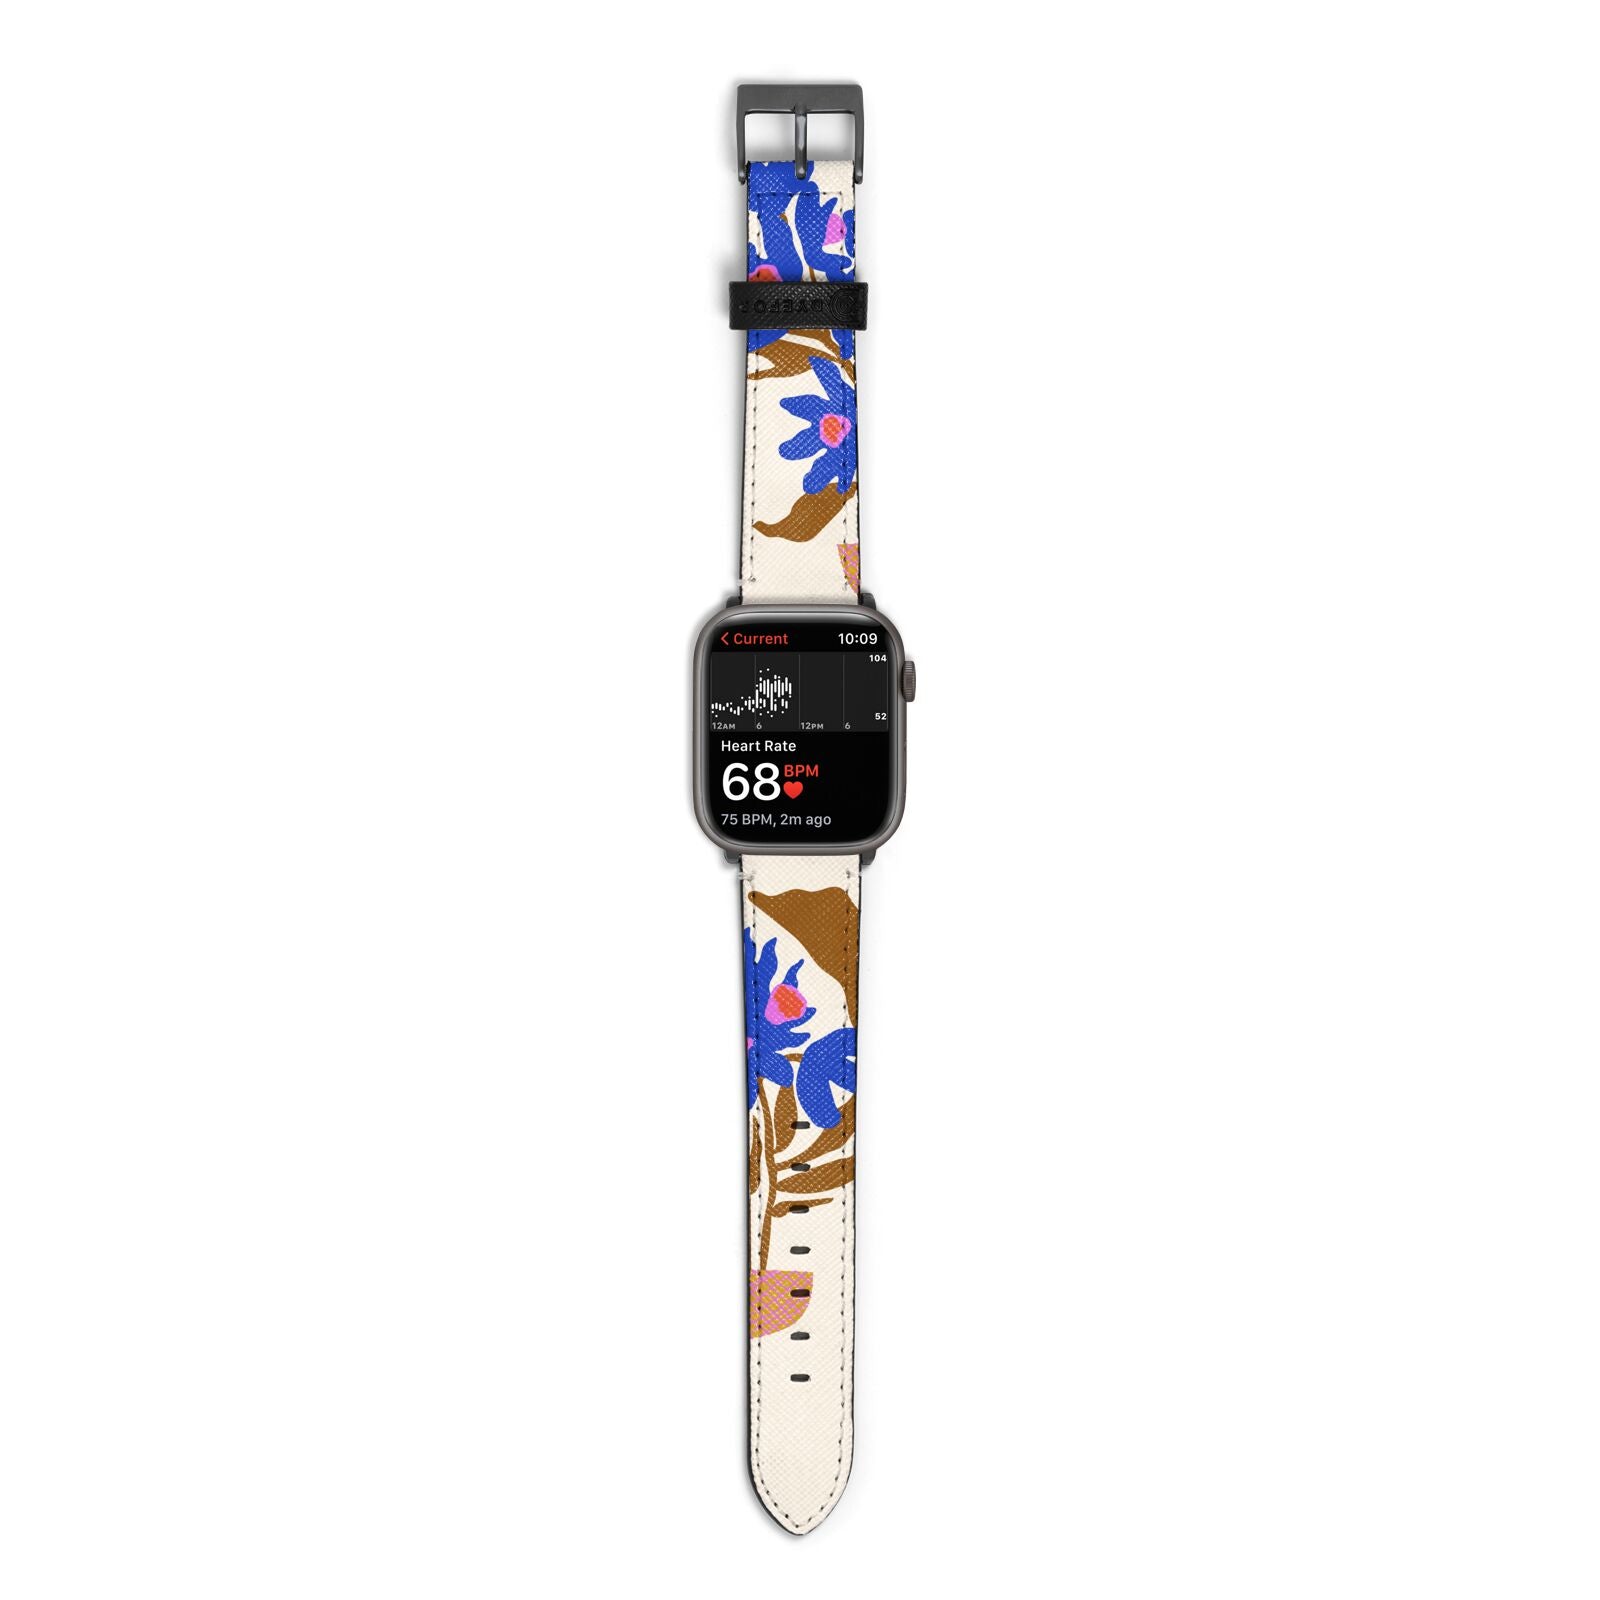 Flowers in a Vase Apple Watch Strap Size 38mm with Space Grey Hardware